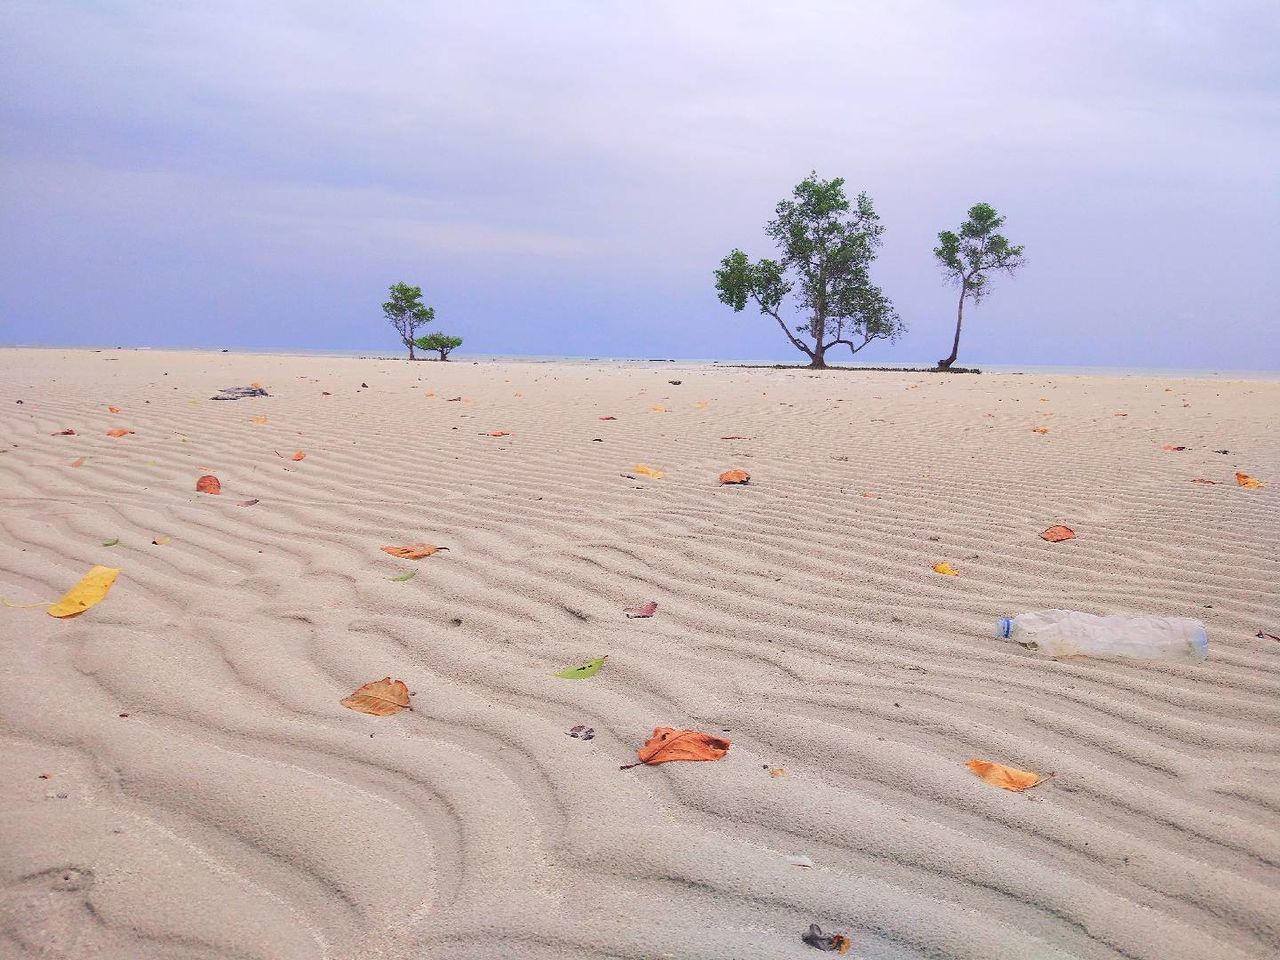 sand, land, sky, tranquility, plant, nature, landscape, beach, cloud - sky, day, scenics - nature, tranquil scene, beauty in nature, tree, environment, no people, non-urban scene, sand dune, outdoors, horizon, arid climate, climate